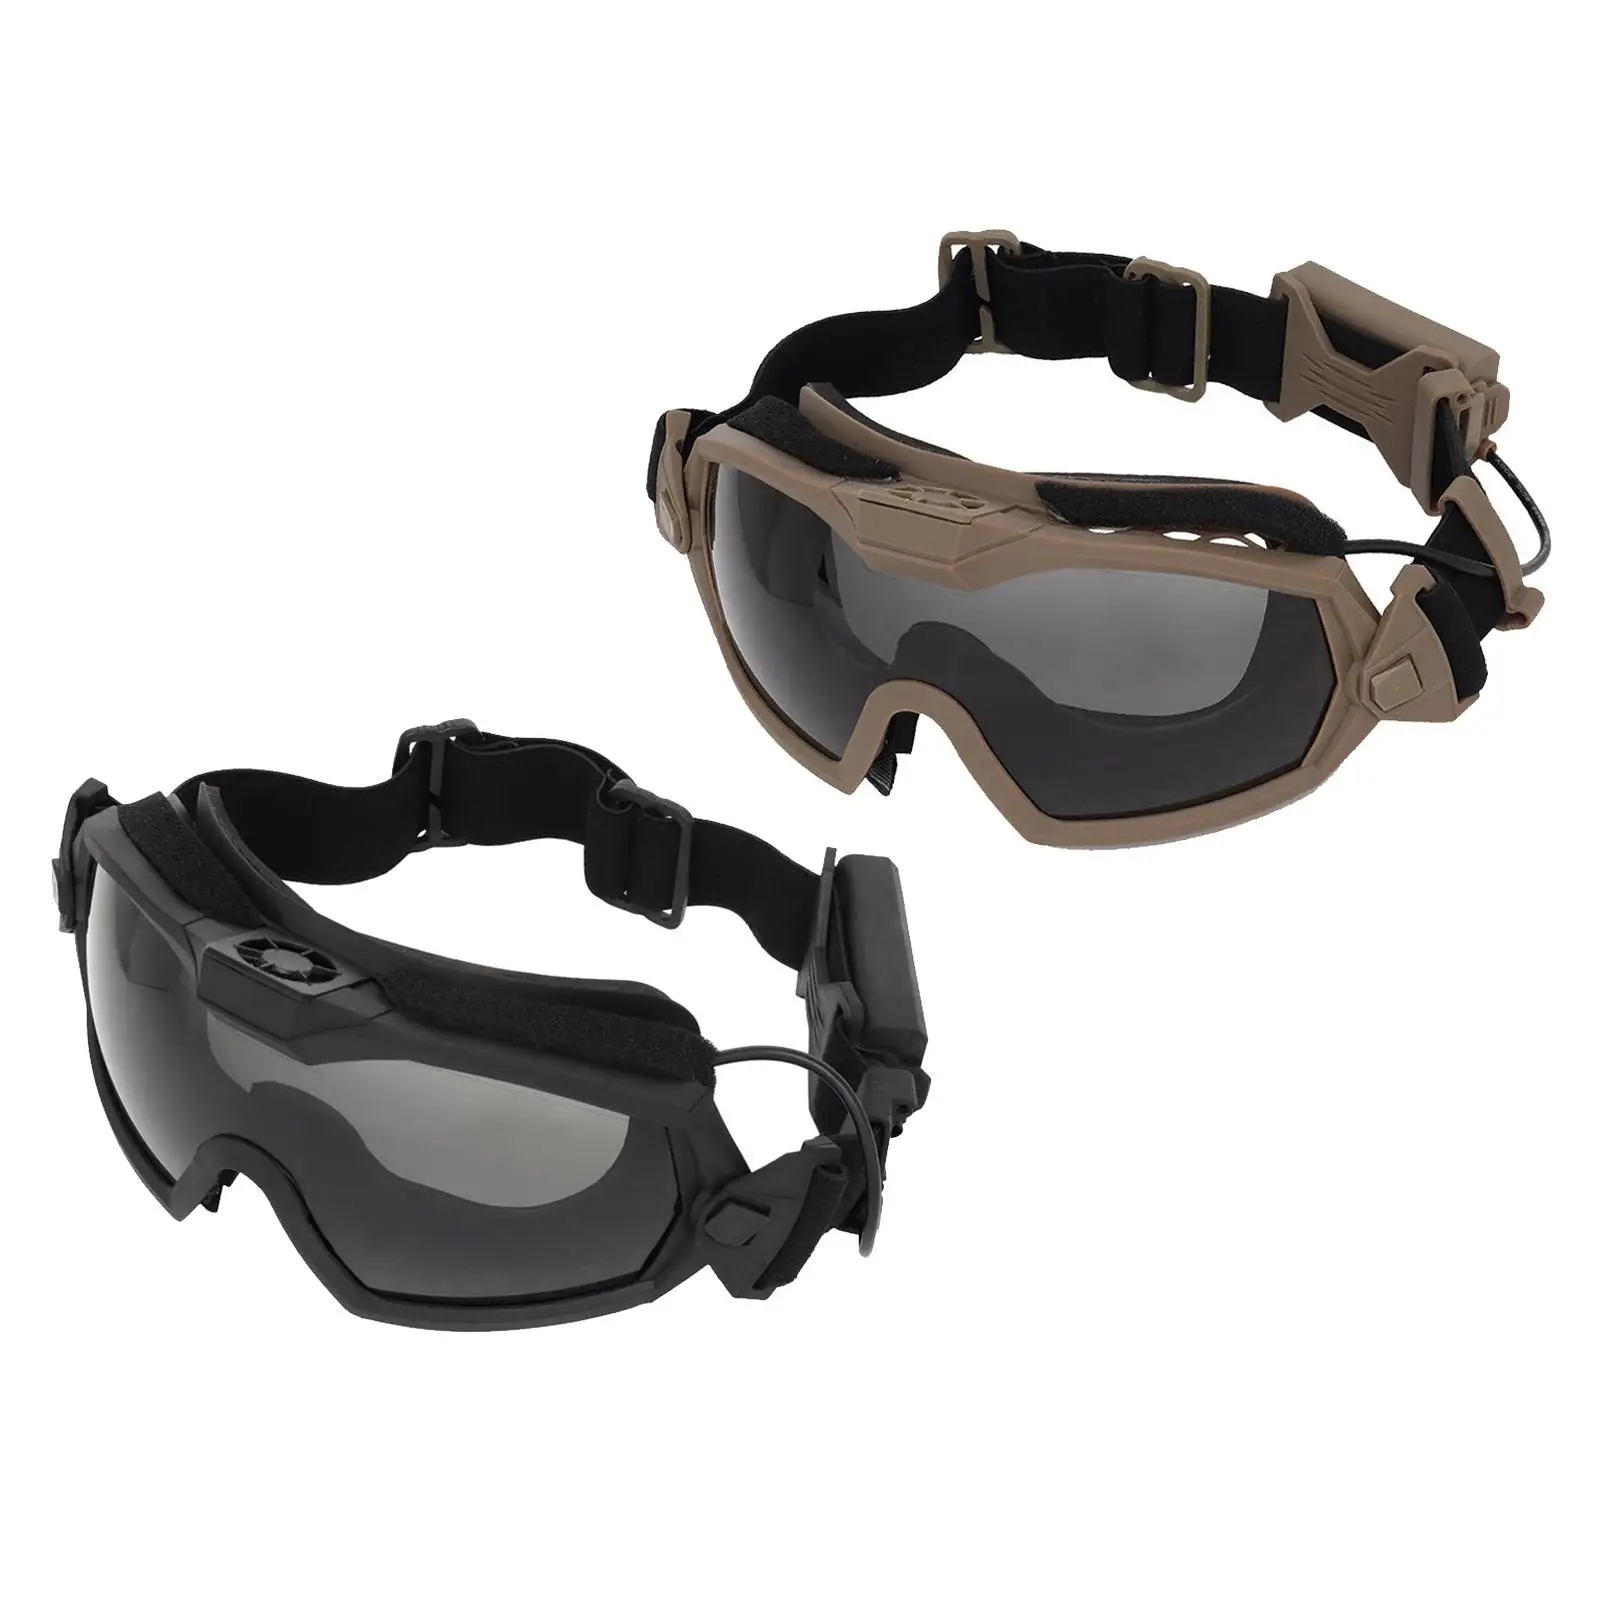 Safety Goggles Motorcycle Goggles Sunglasses with  for Shooting Hiking Skiing Riding Eye  with Cooling Fan